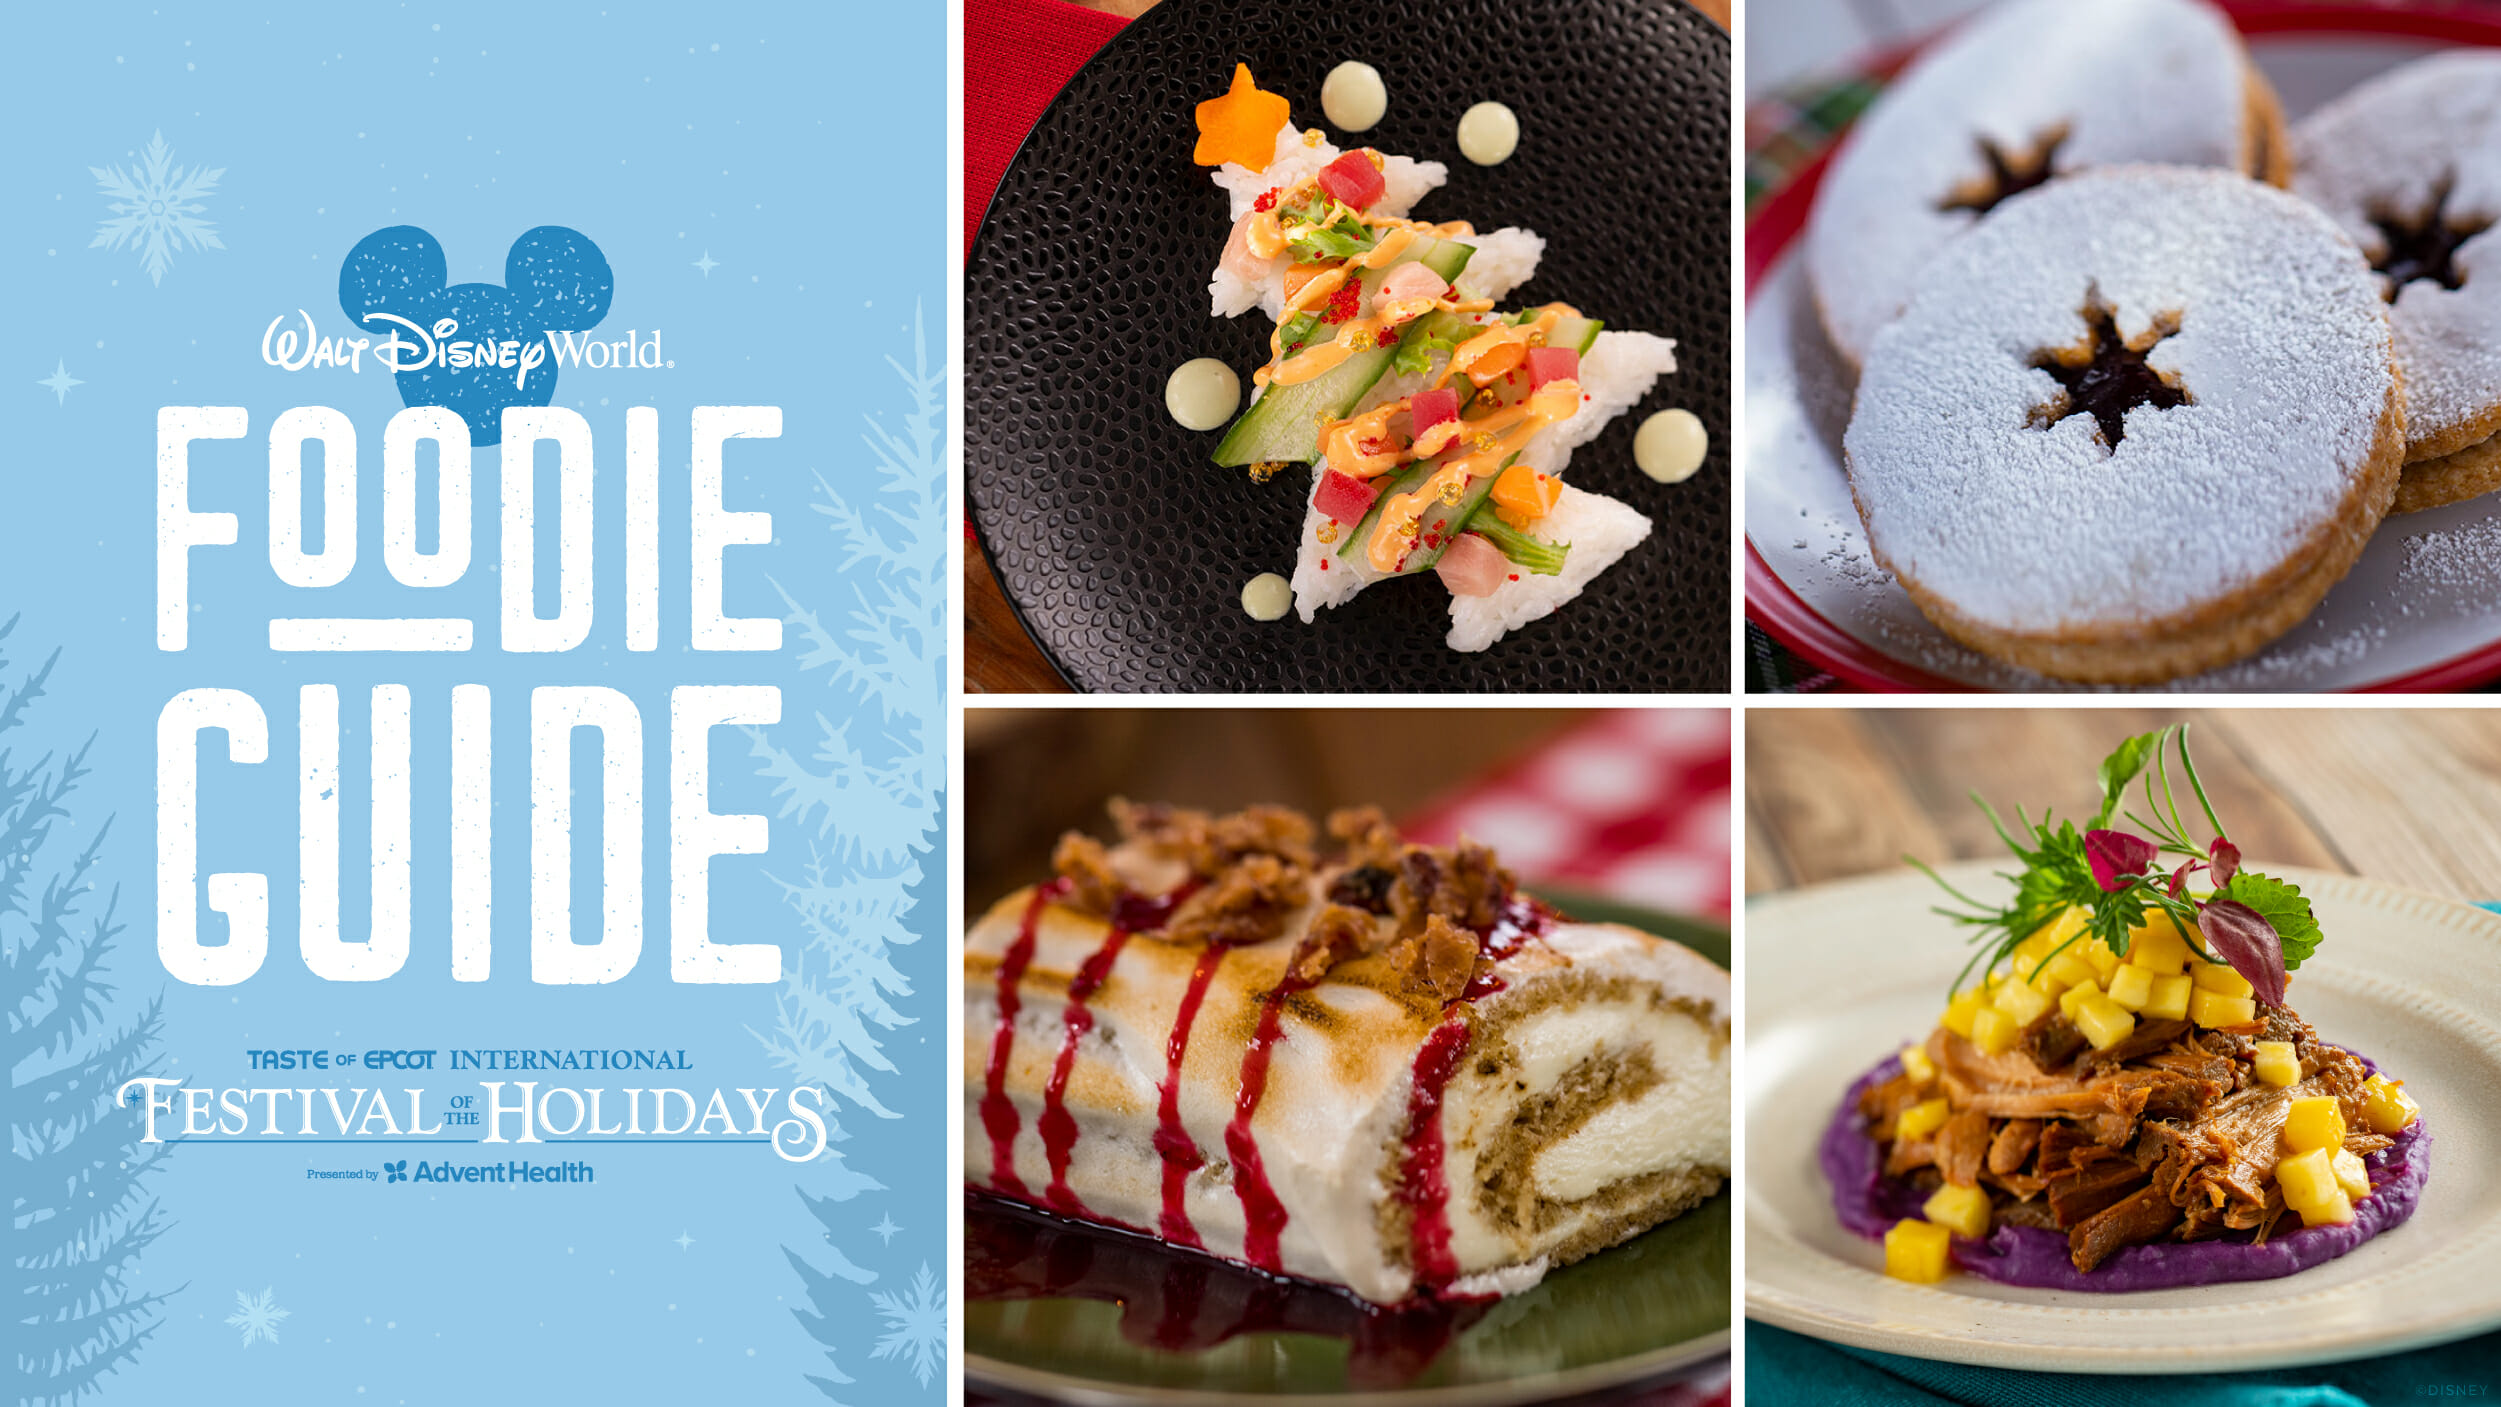 festival of the holidays Foodie Guide